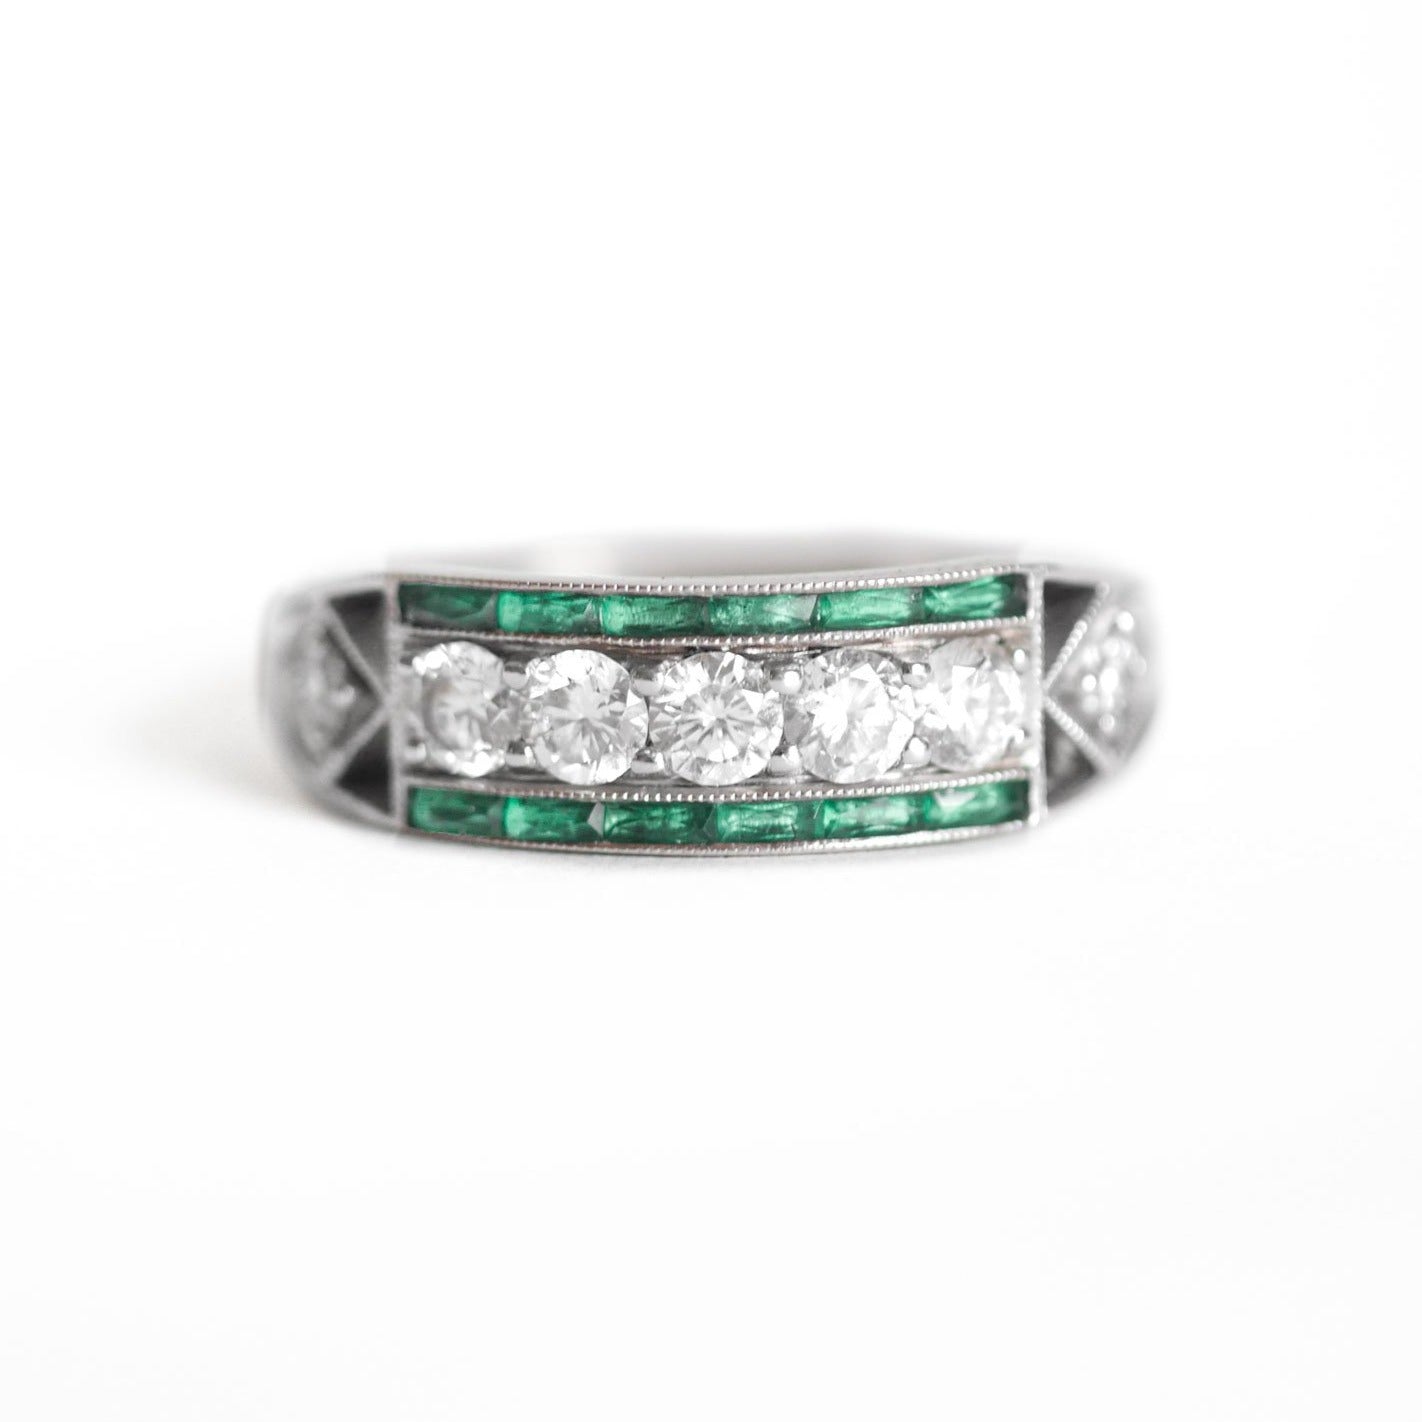 Art Deco Five Diamond Ring with French Cut Emeralds